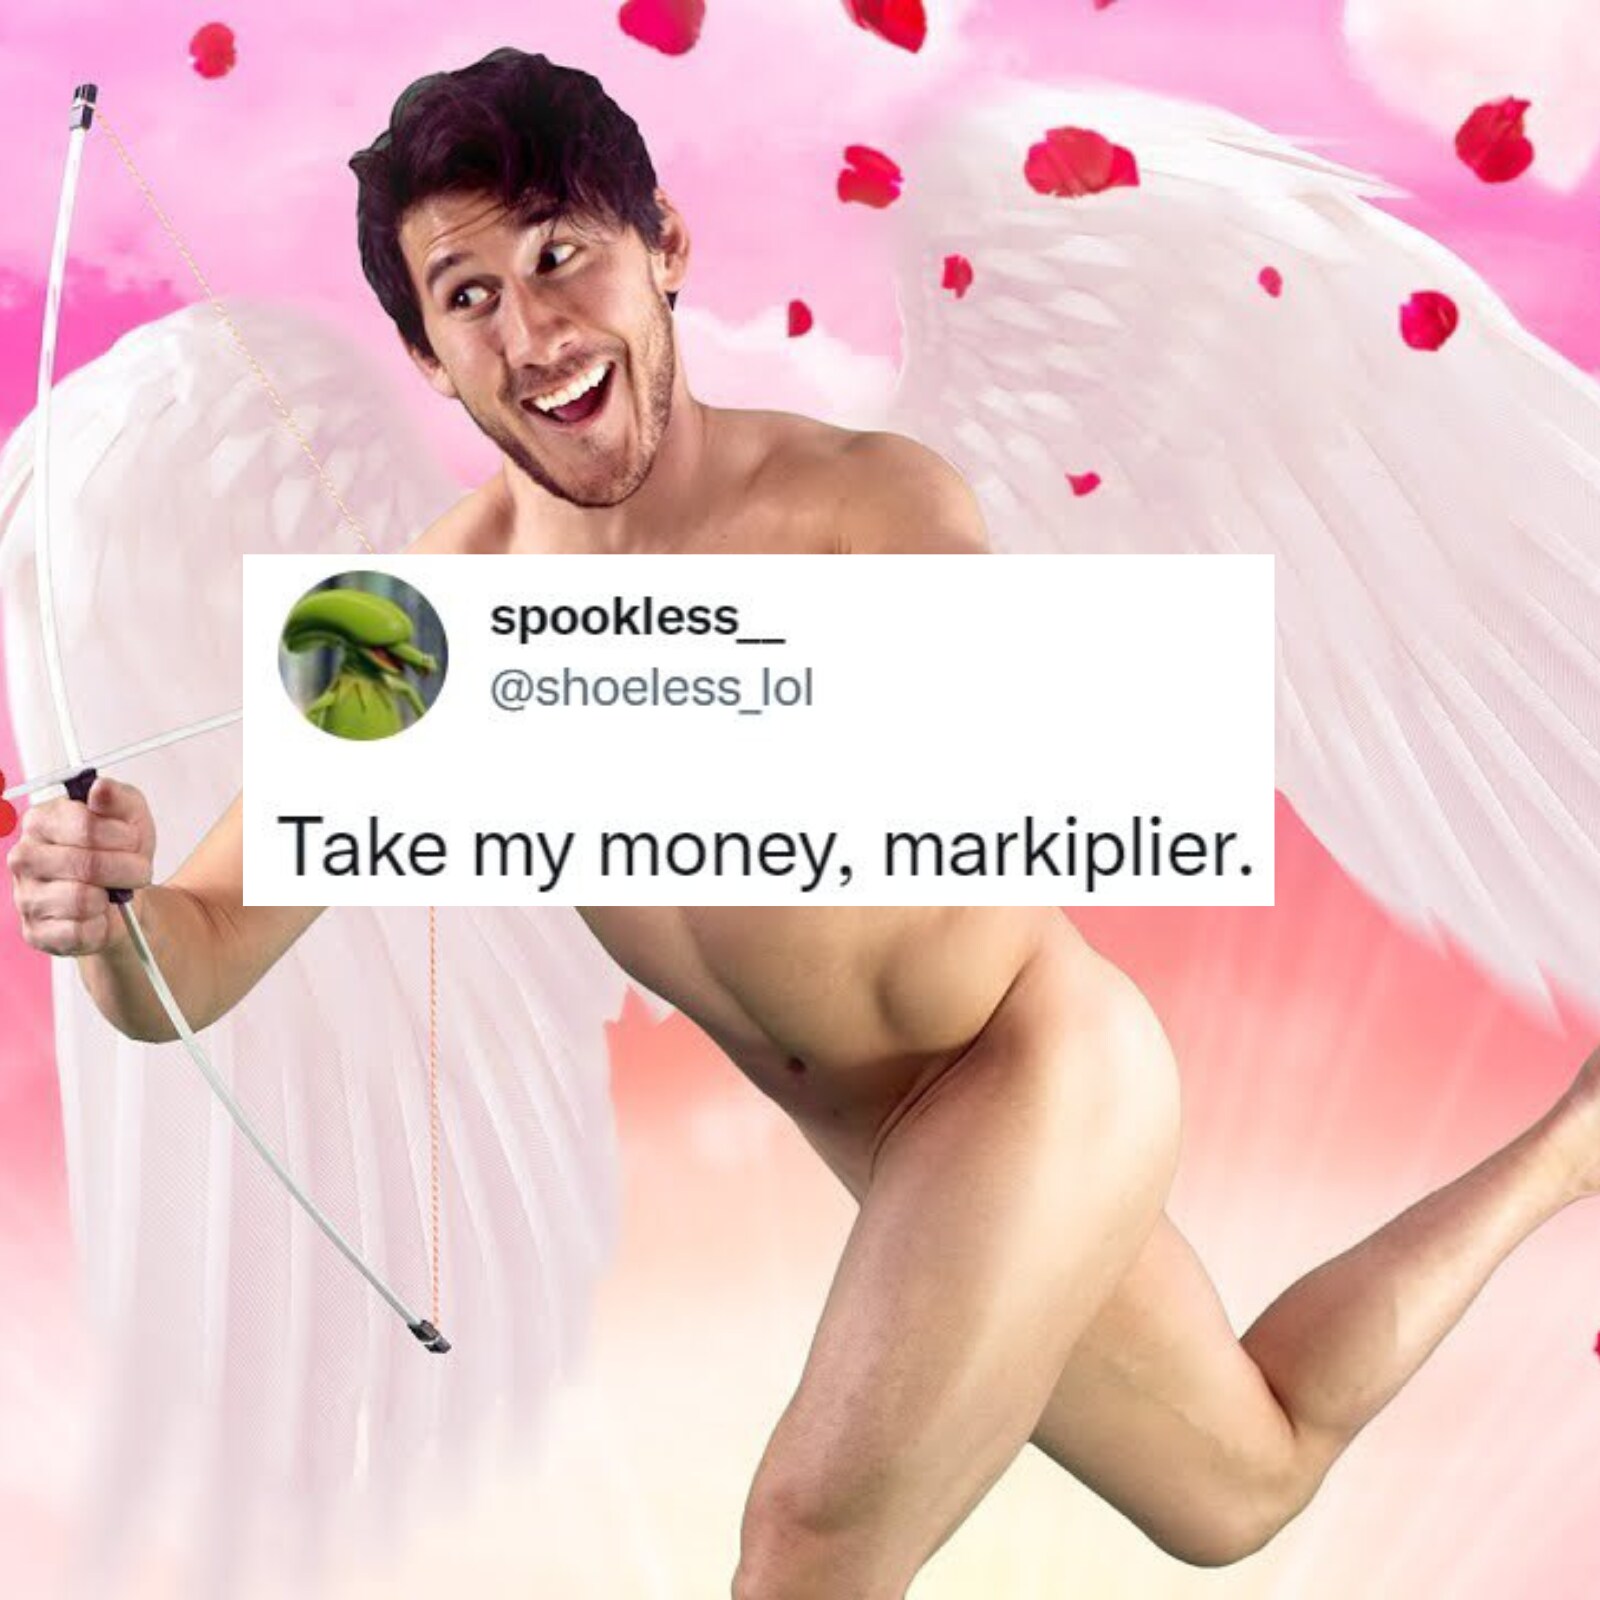 Did markiplier make an onlyfans account